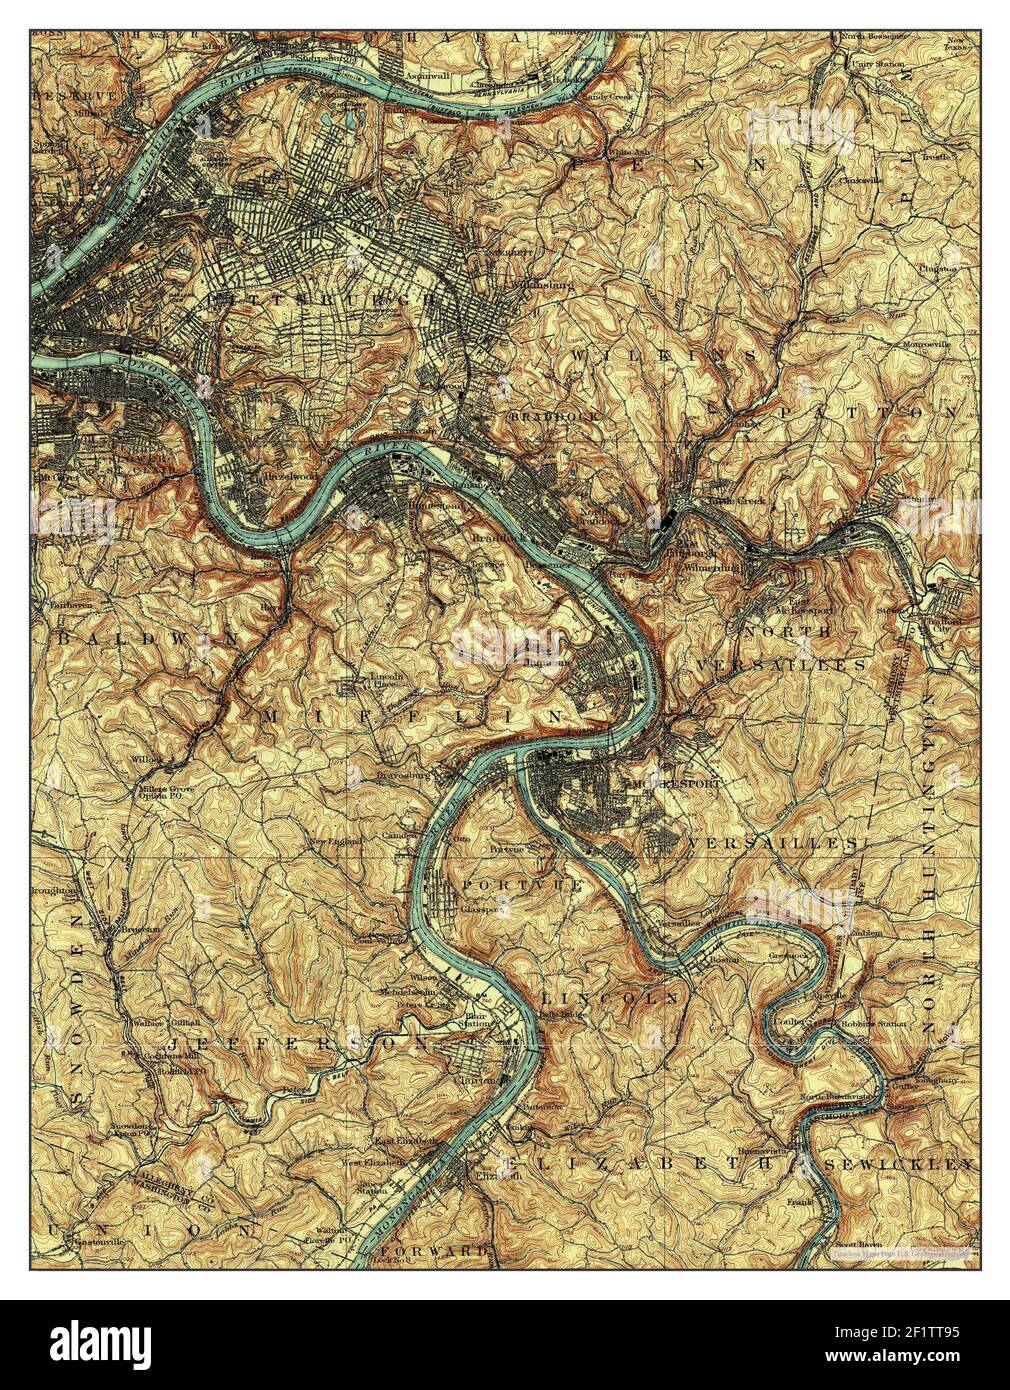 Pittsburgh Pennsylvania Map 1907 162500 United States Of America By Timeless Maps Data Us 8643